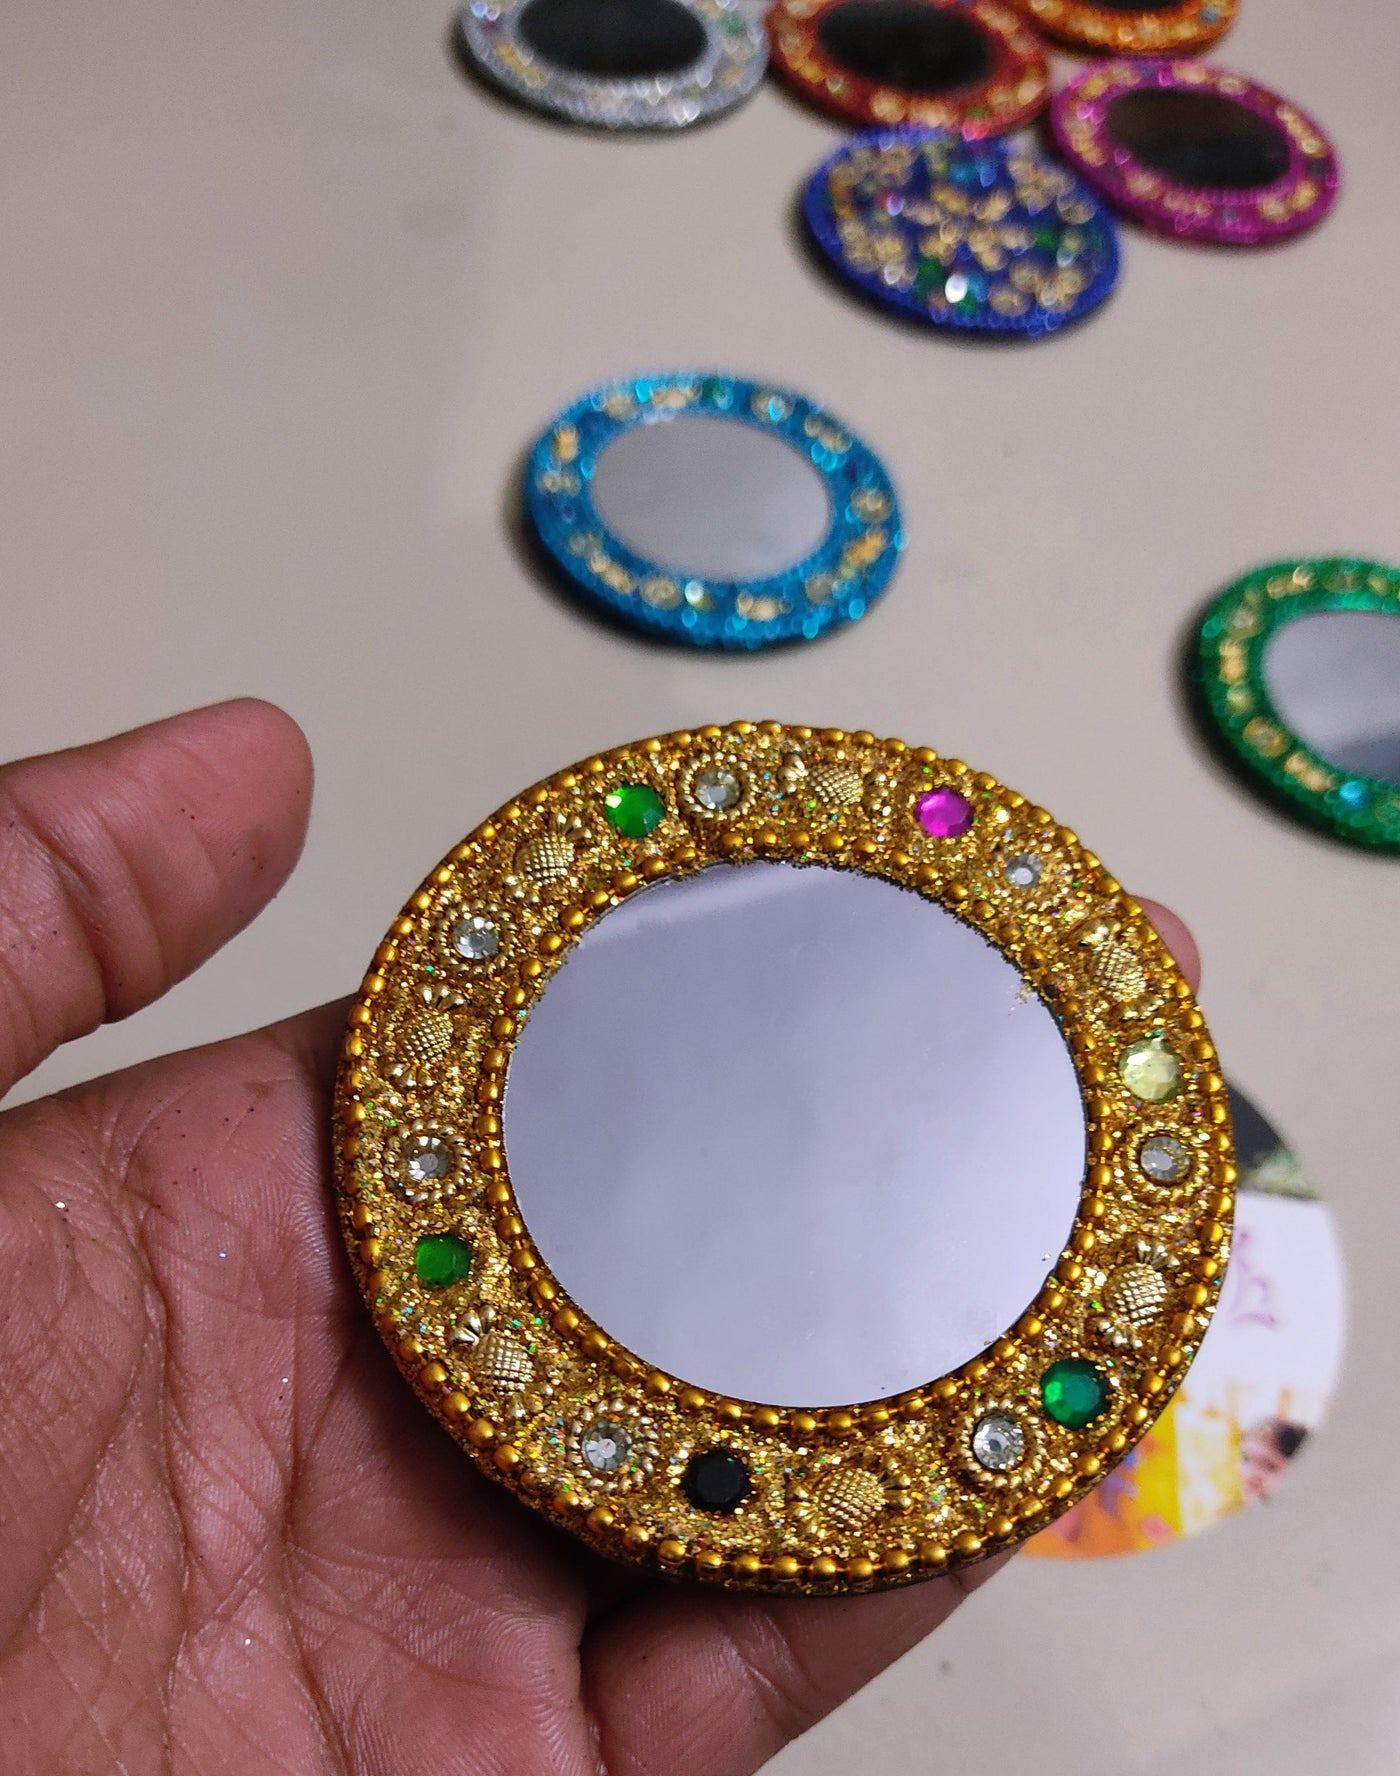 LAMANSH Hand Mirrors for gifting Assorted colors / Lakh work / Standard LAMANSH® (Pack of 200) Small Size Round Pocket Lac work Mirrors for Giveaways / Haldi Mehendi Pooja Wedding Gifts 🎁favors